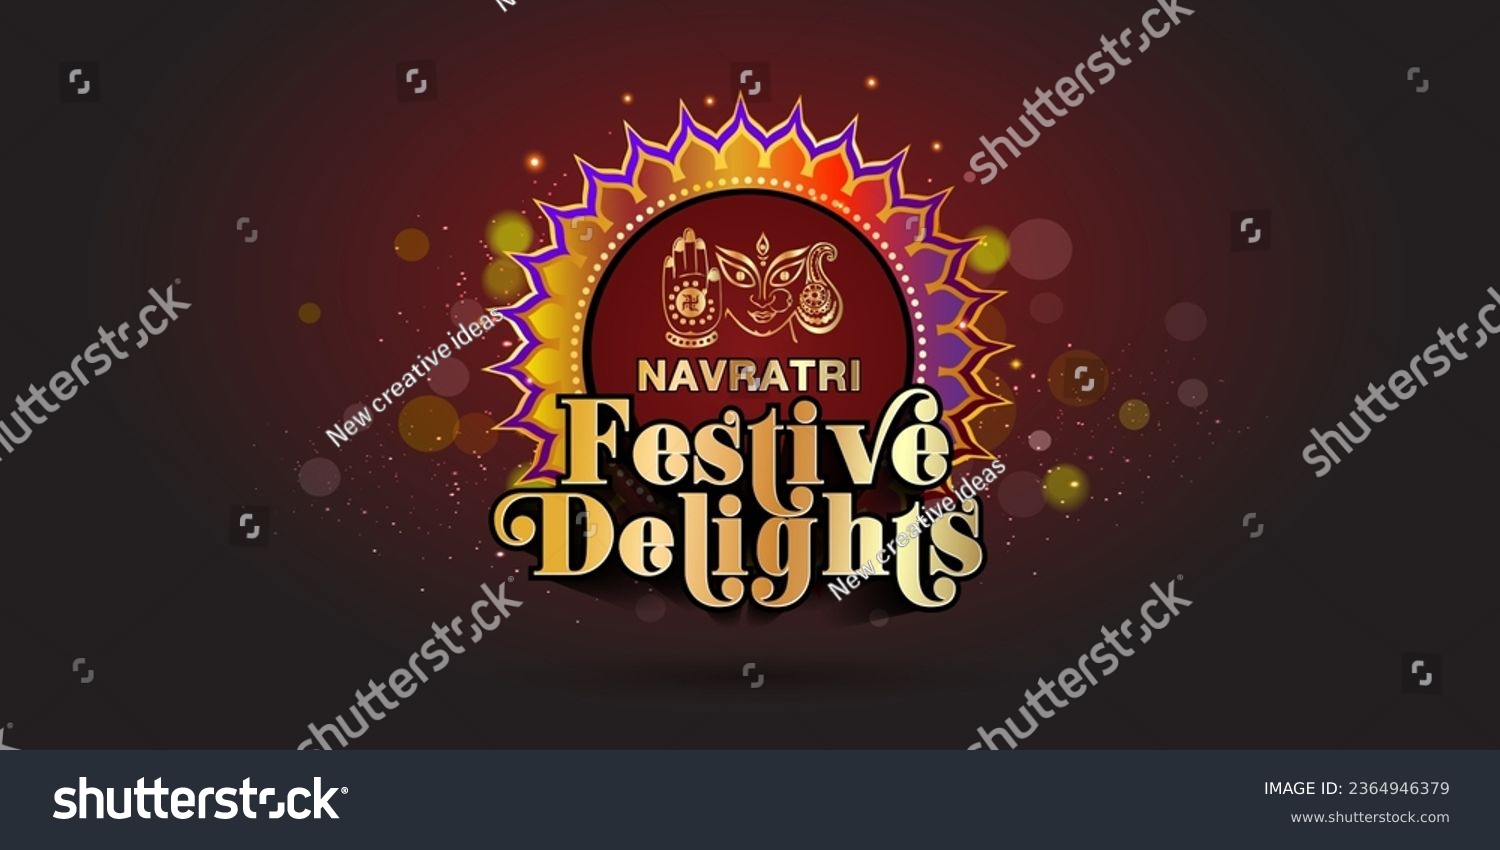 SVG of Vector design of Indian festival sale, Advertising, promotional, logo, template. Maa Durga with Navratri Festive Delights 3d text and vintage on dark red background. svg